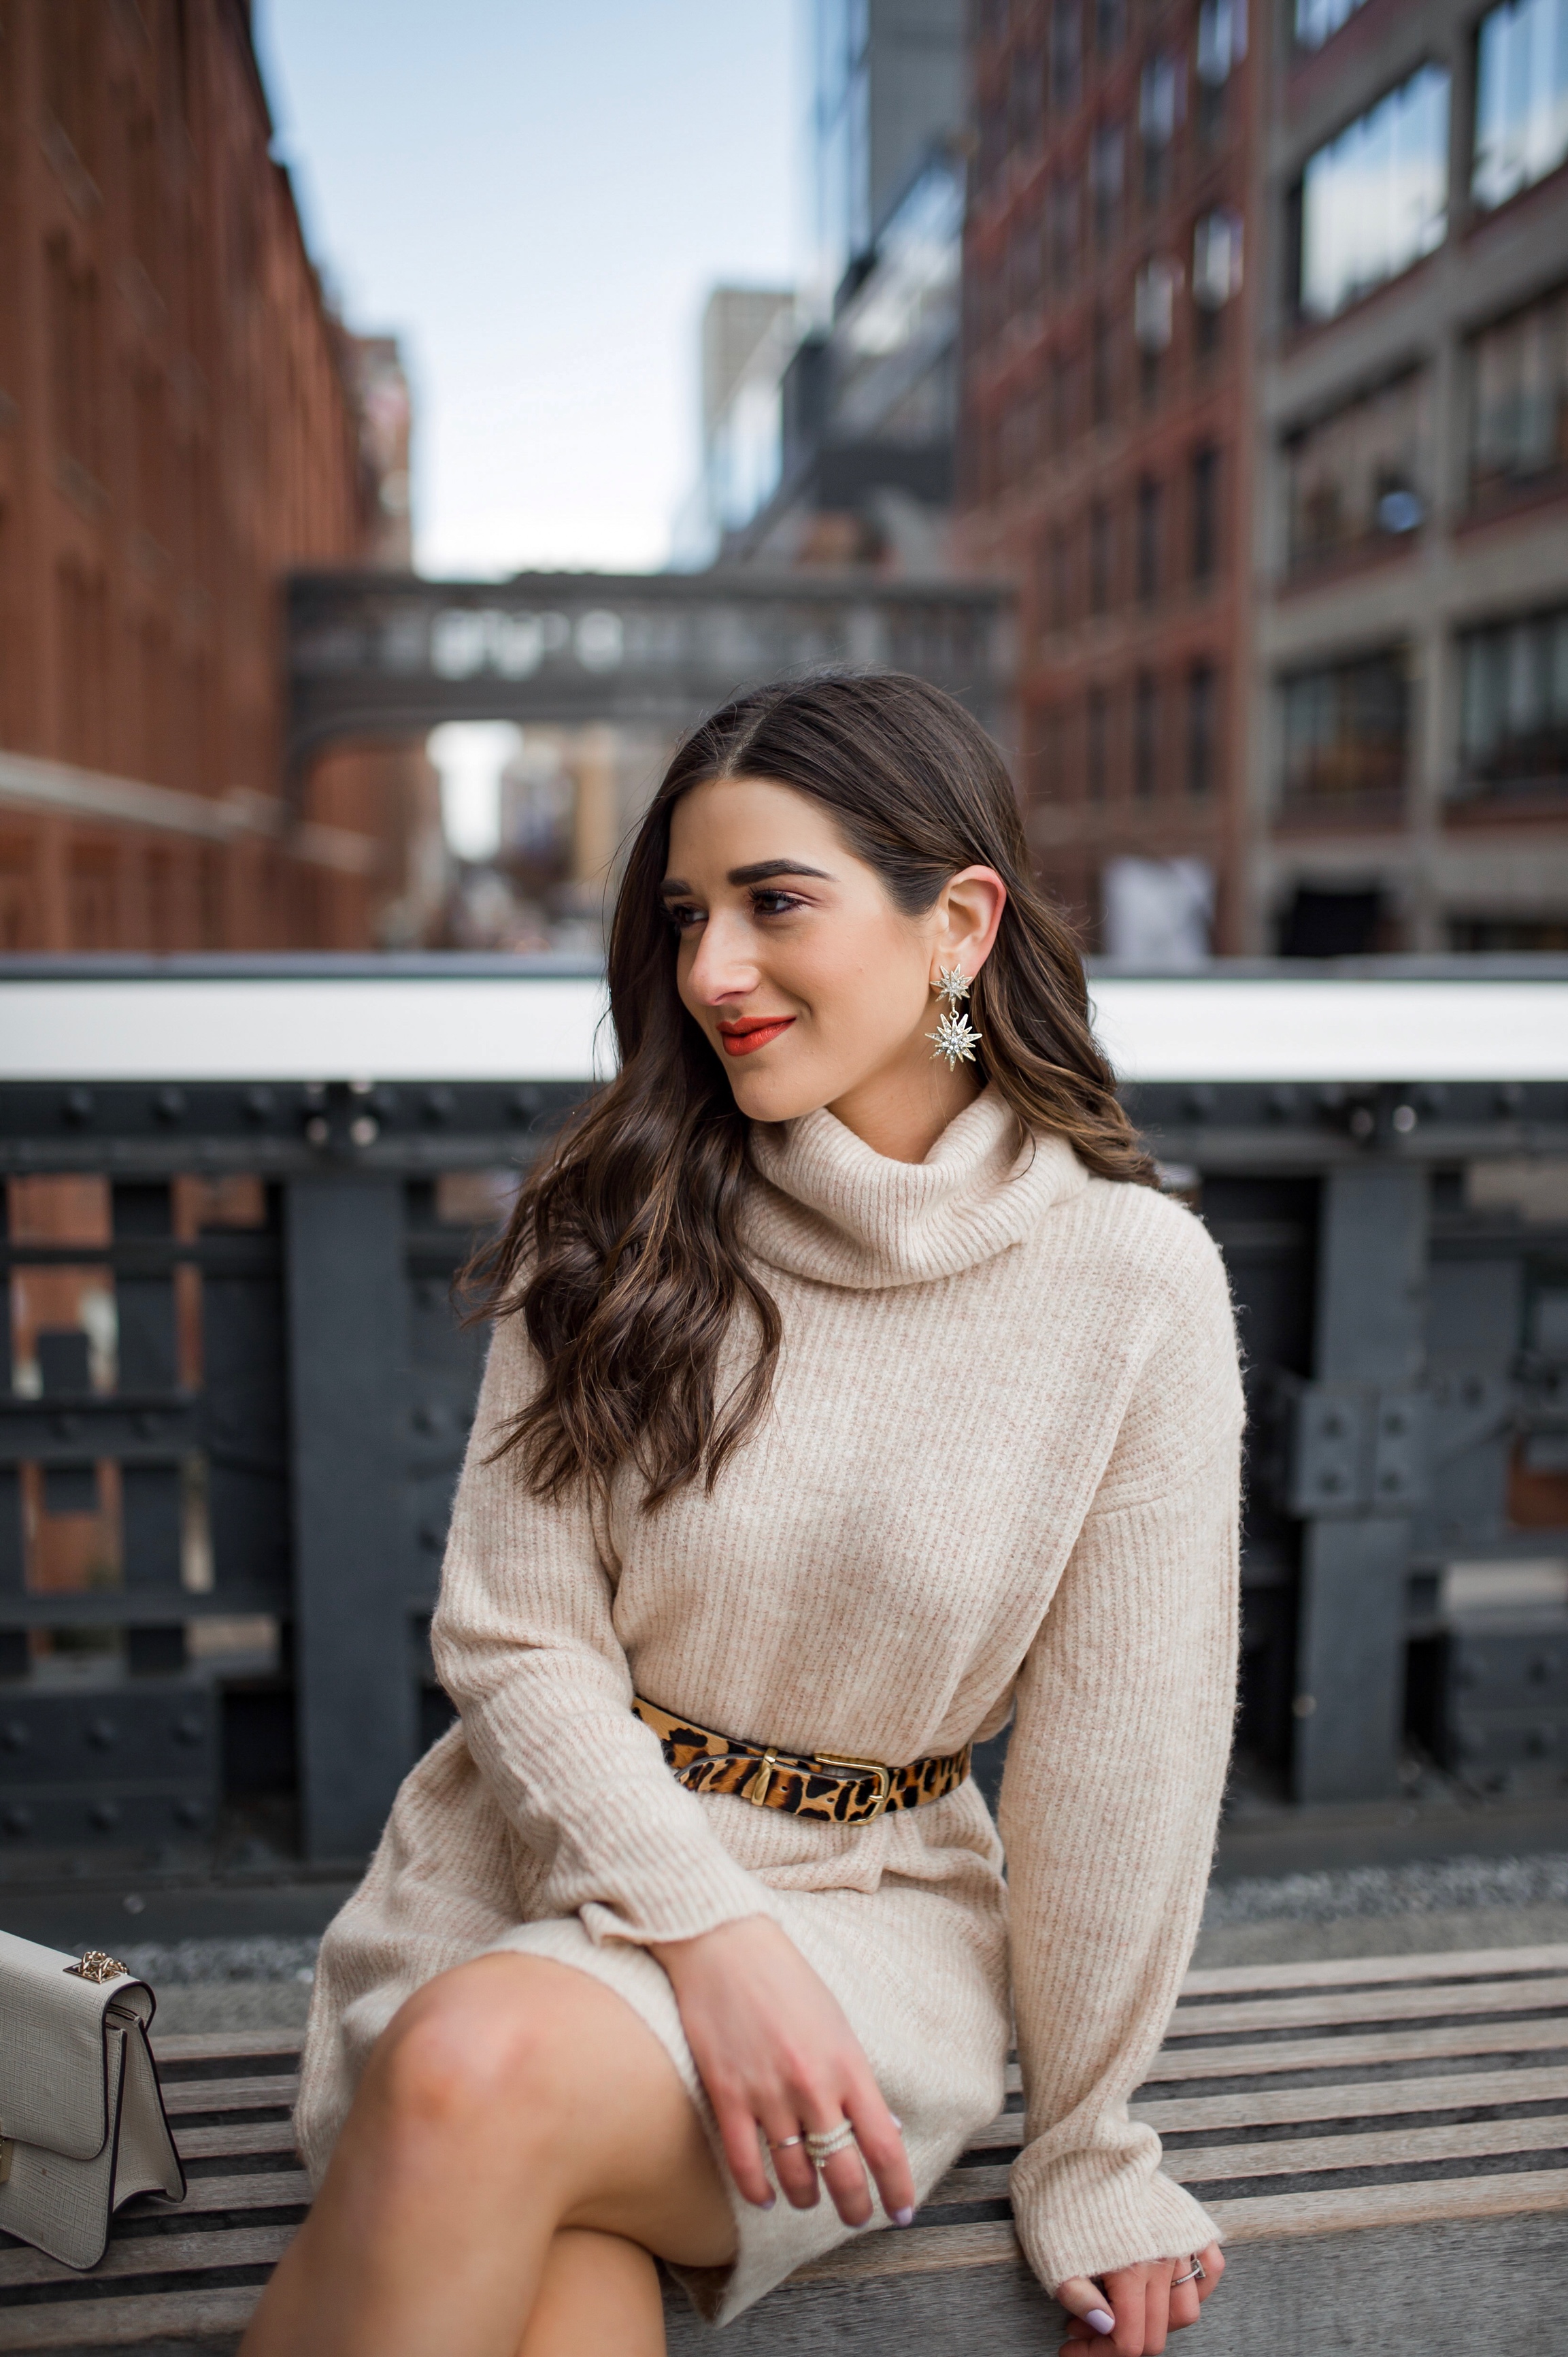 Why Blogging Is Far From Freeloading Beige Sweater Dress White Booties Esther Santer Fashion Blog NYC Street Style Blogger Outfit OOTD Trendy Shopping Leopard Belt Neutral Winter How To Wear Shop Sale Mango Jcrew  Inspiration The High Line Photoshoot.jpg